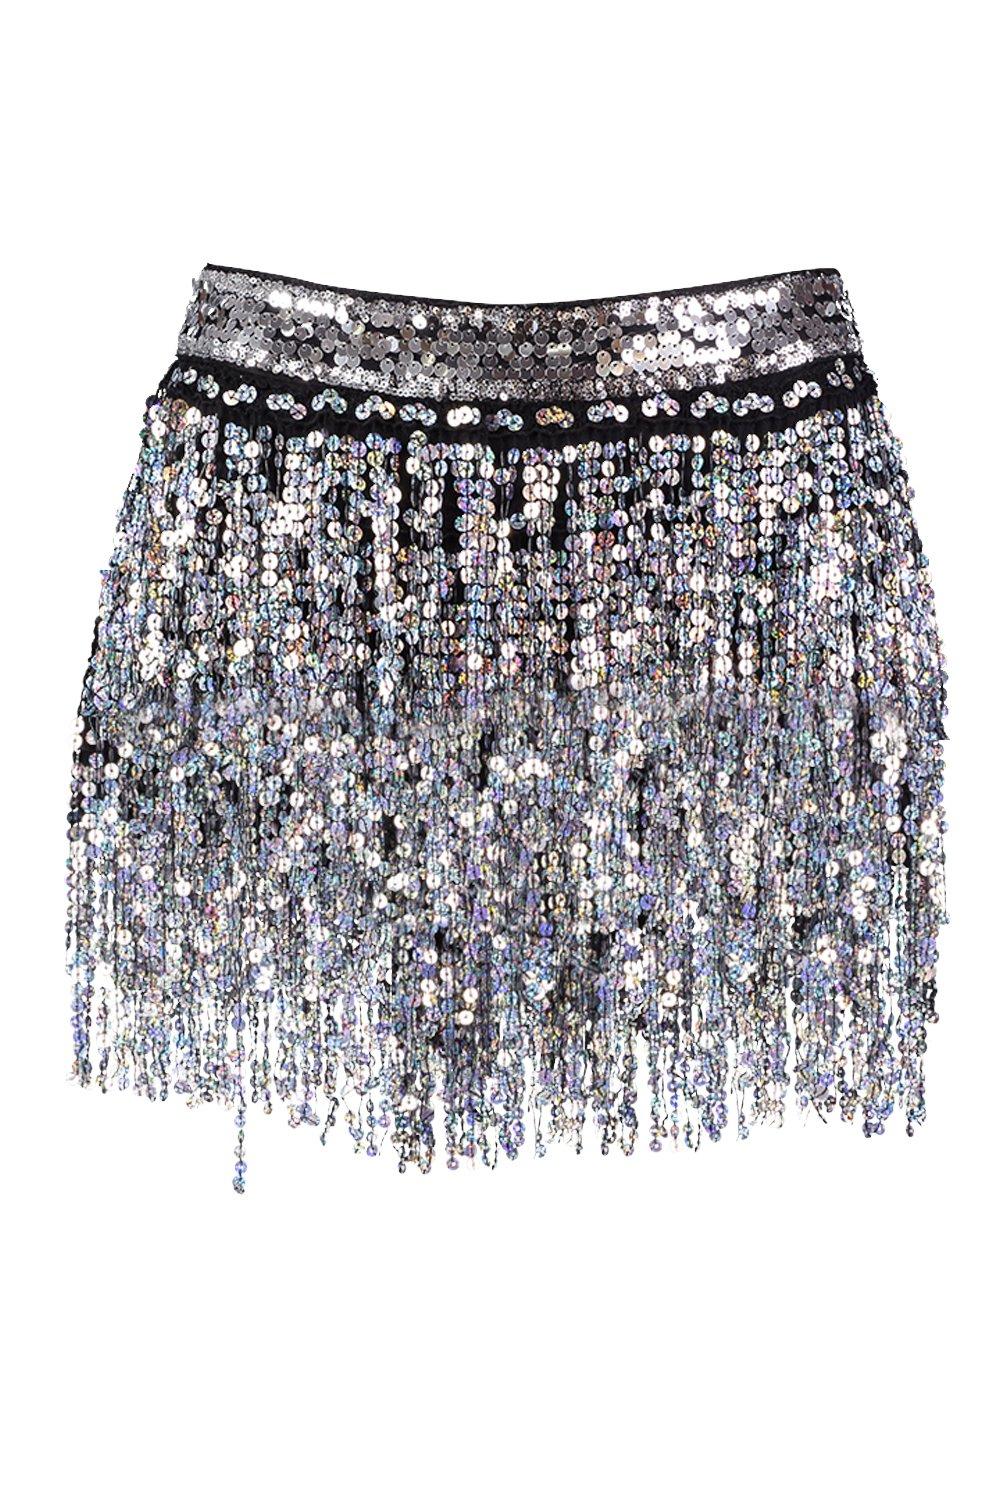 sequined hot pants